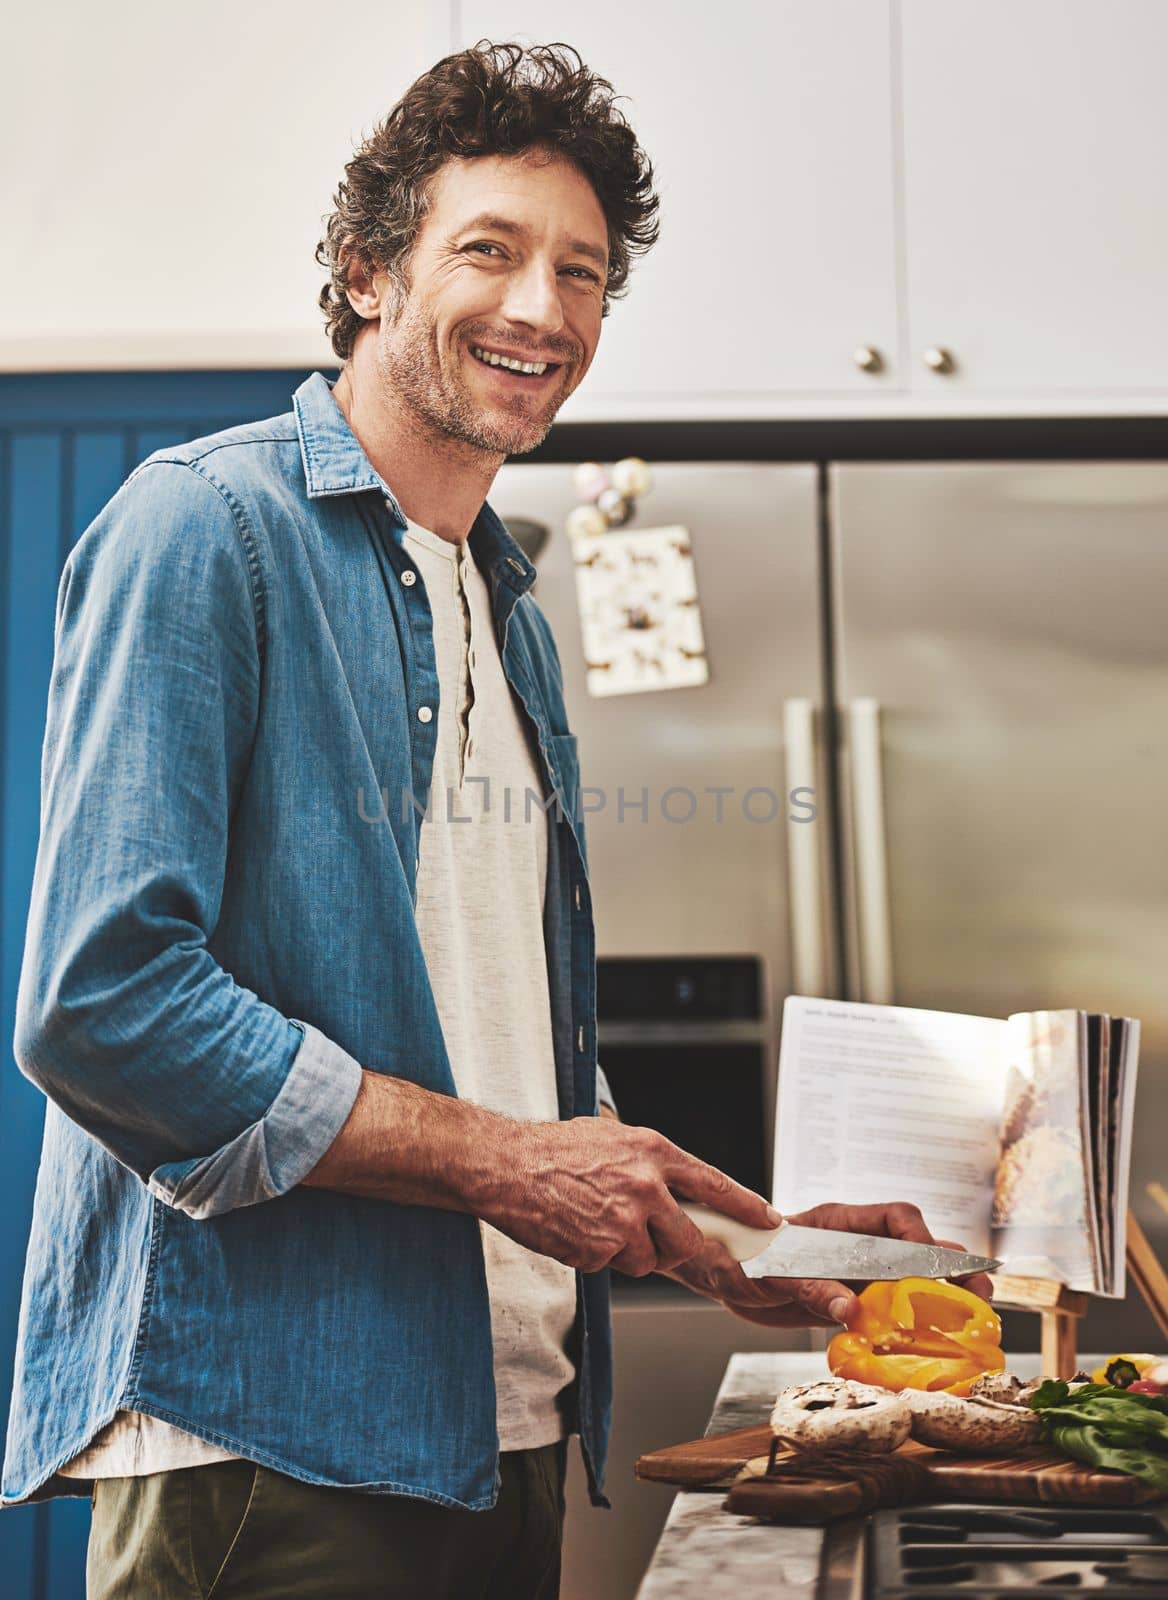 When you eat better, you feel better. Portrait of a happy bachelor chopping vegetables in his kitchen